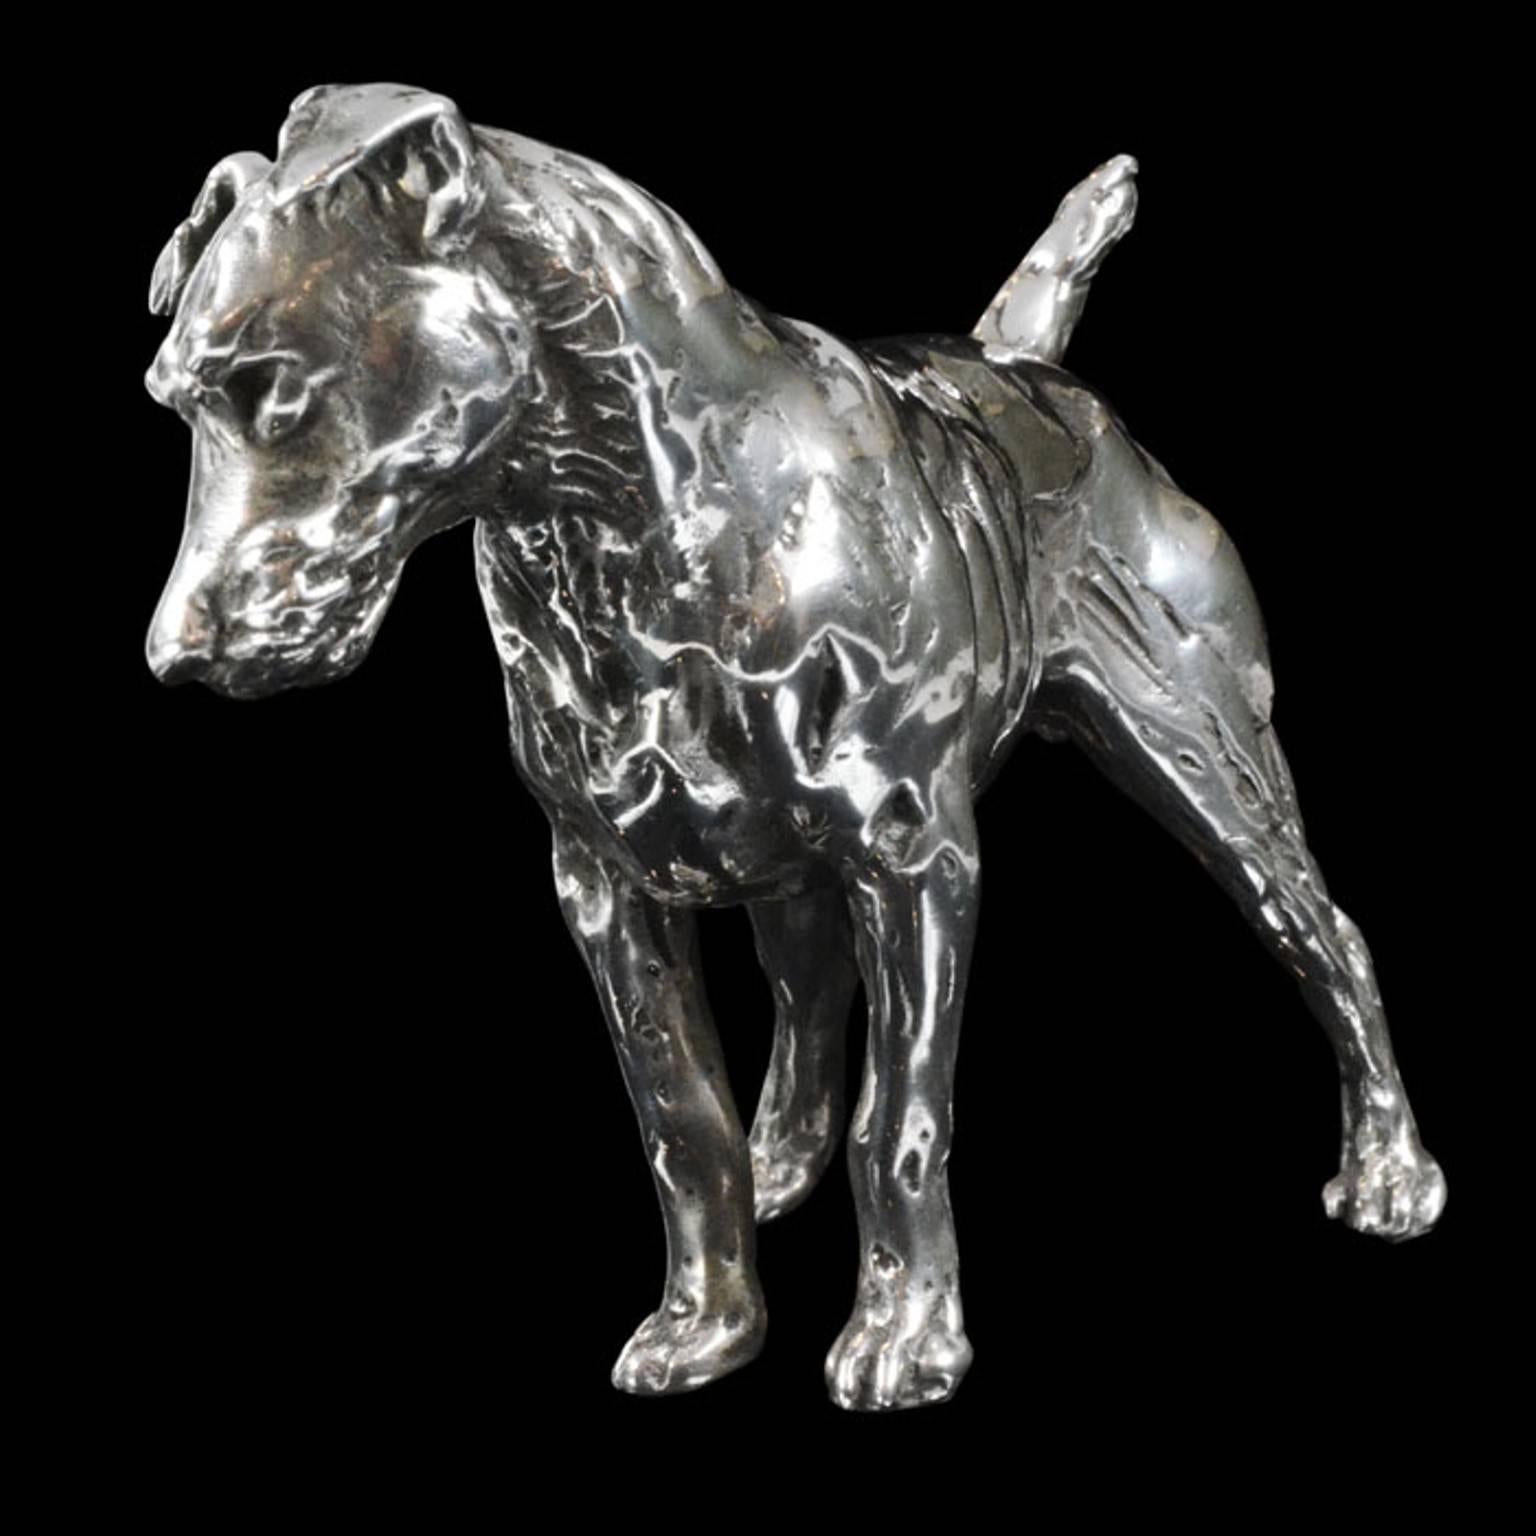 'Patterdale Terrier' in Sterling silver, Silver sculpture by Lucy Kinsella
The limited edition finely modelled terrier stands squarely with his head cocked to one side, ears pricked and short tail pointing straight upwards. He stares intently at the